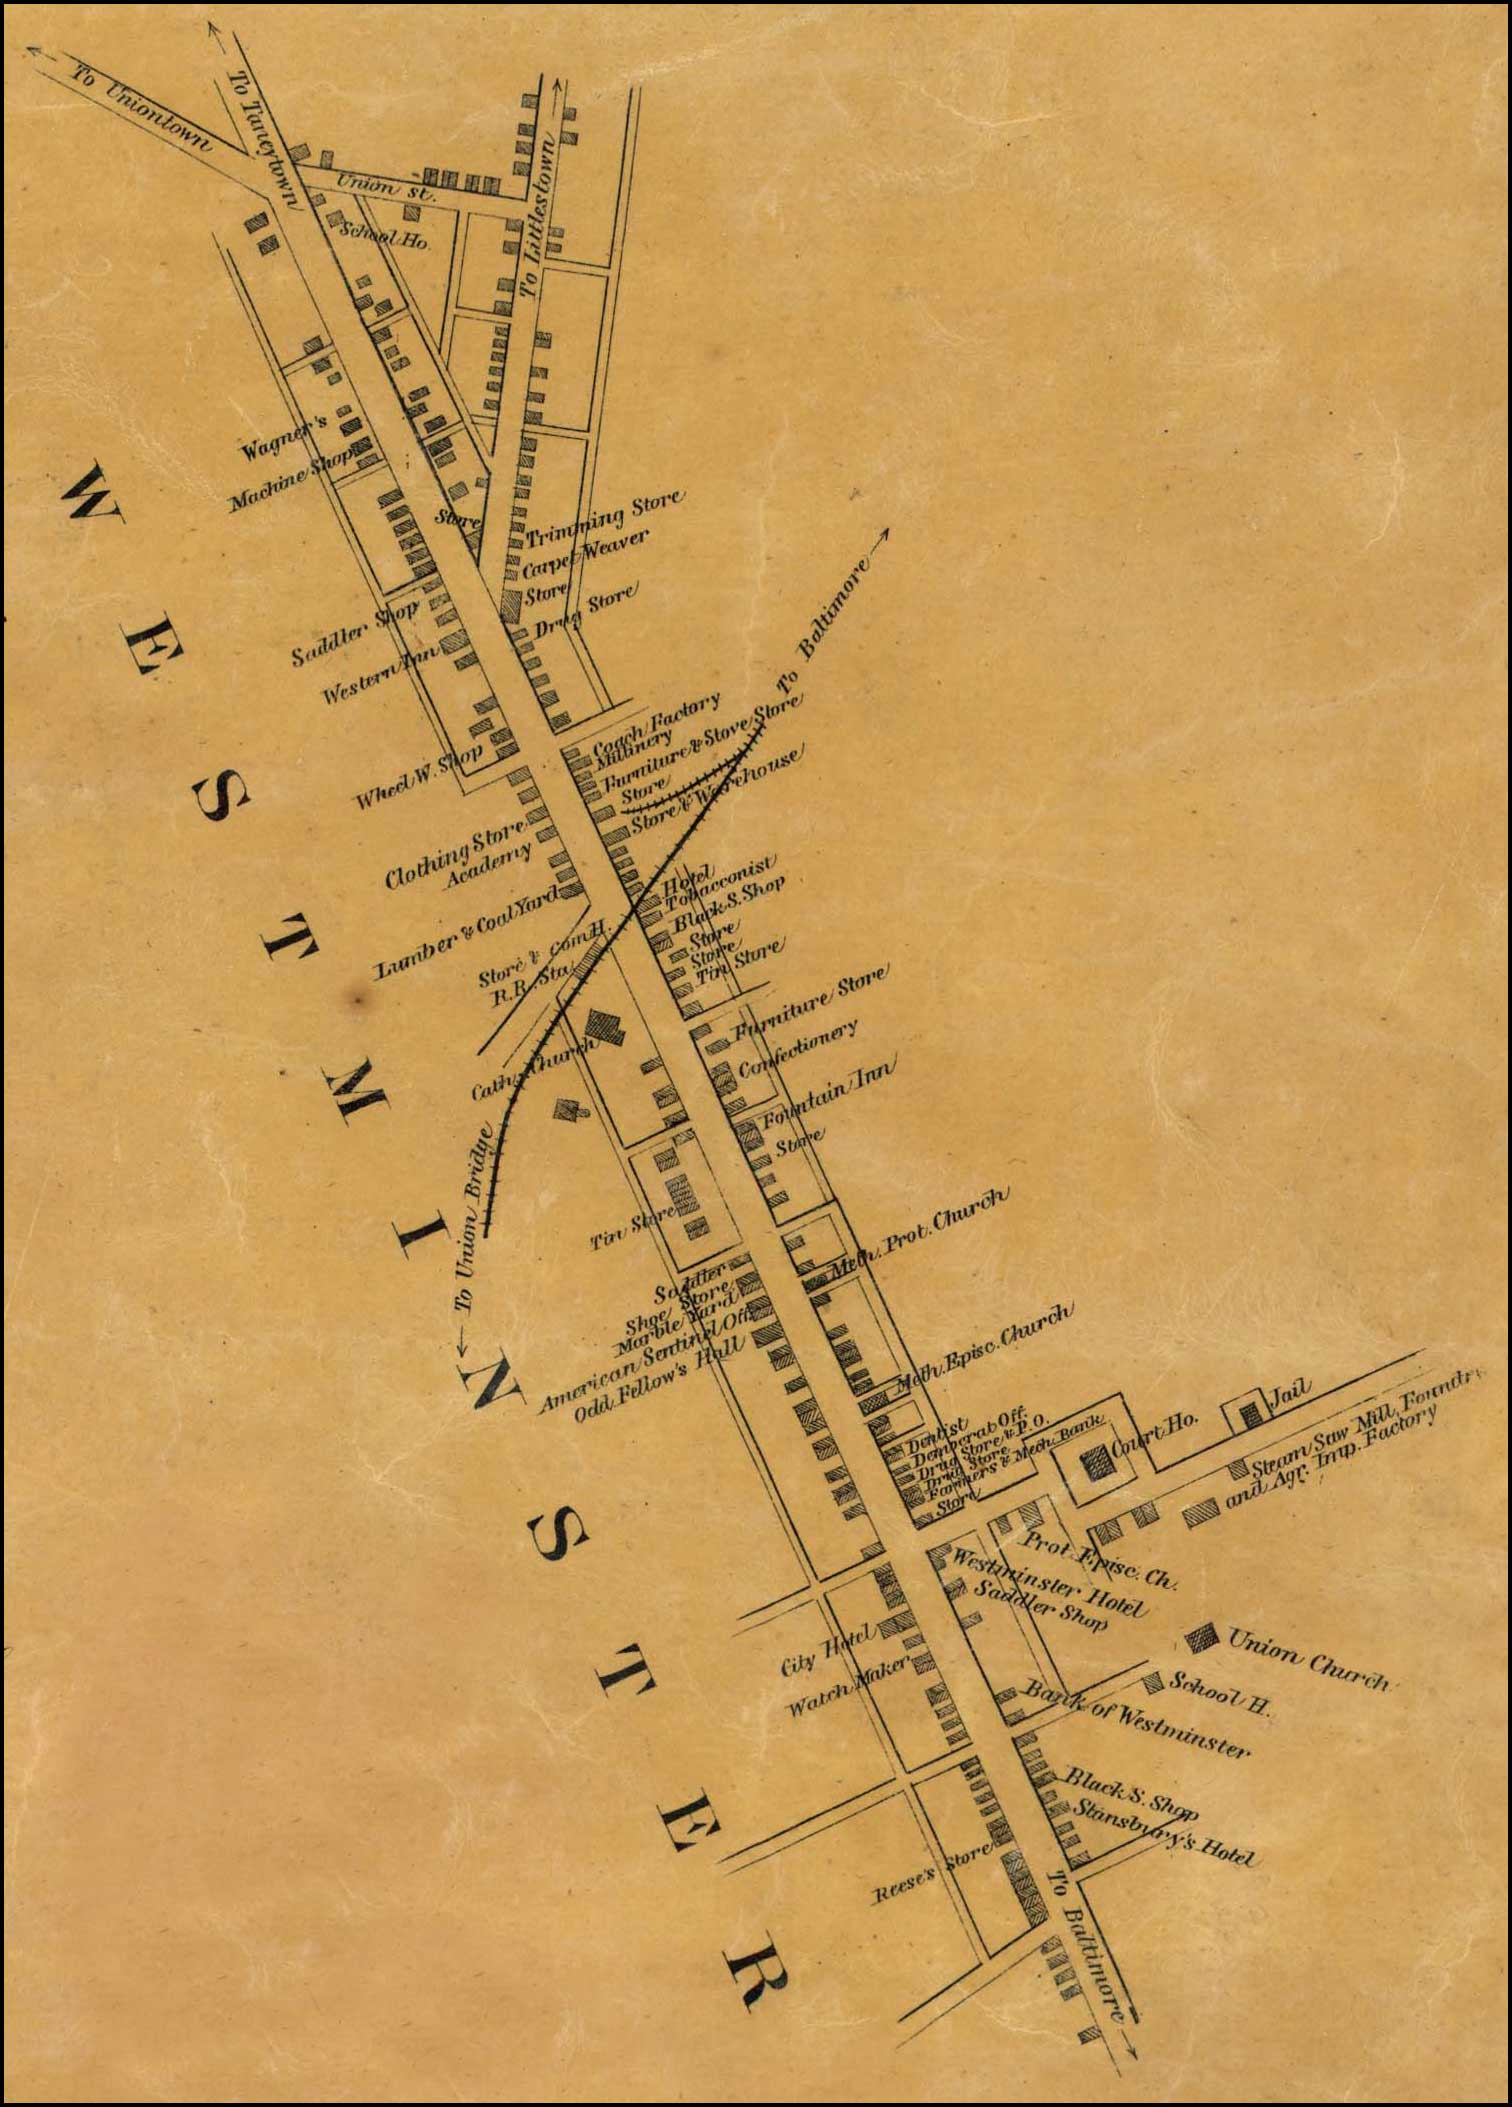 Detail of Westminster from Simon J. Martenet, Map of Carroll County, 1862, Library of Congress, MSA SC 1213-1-119 